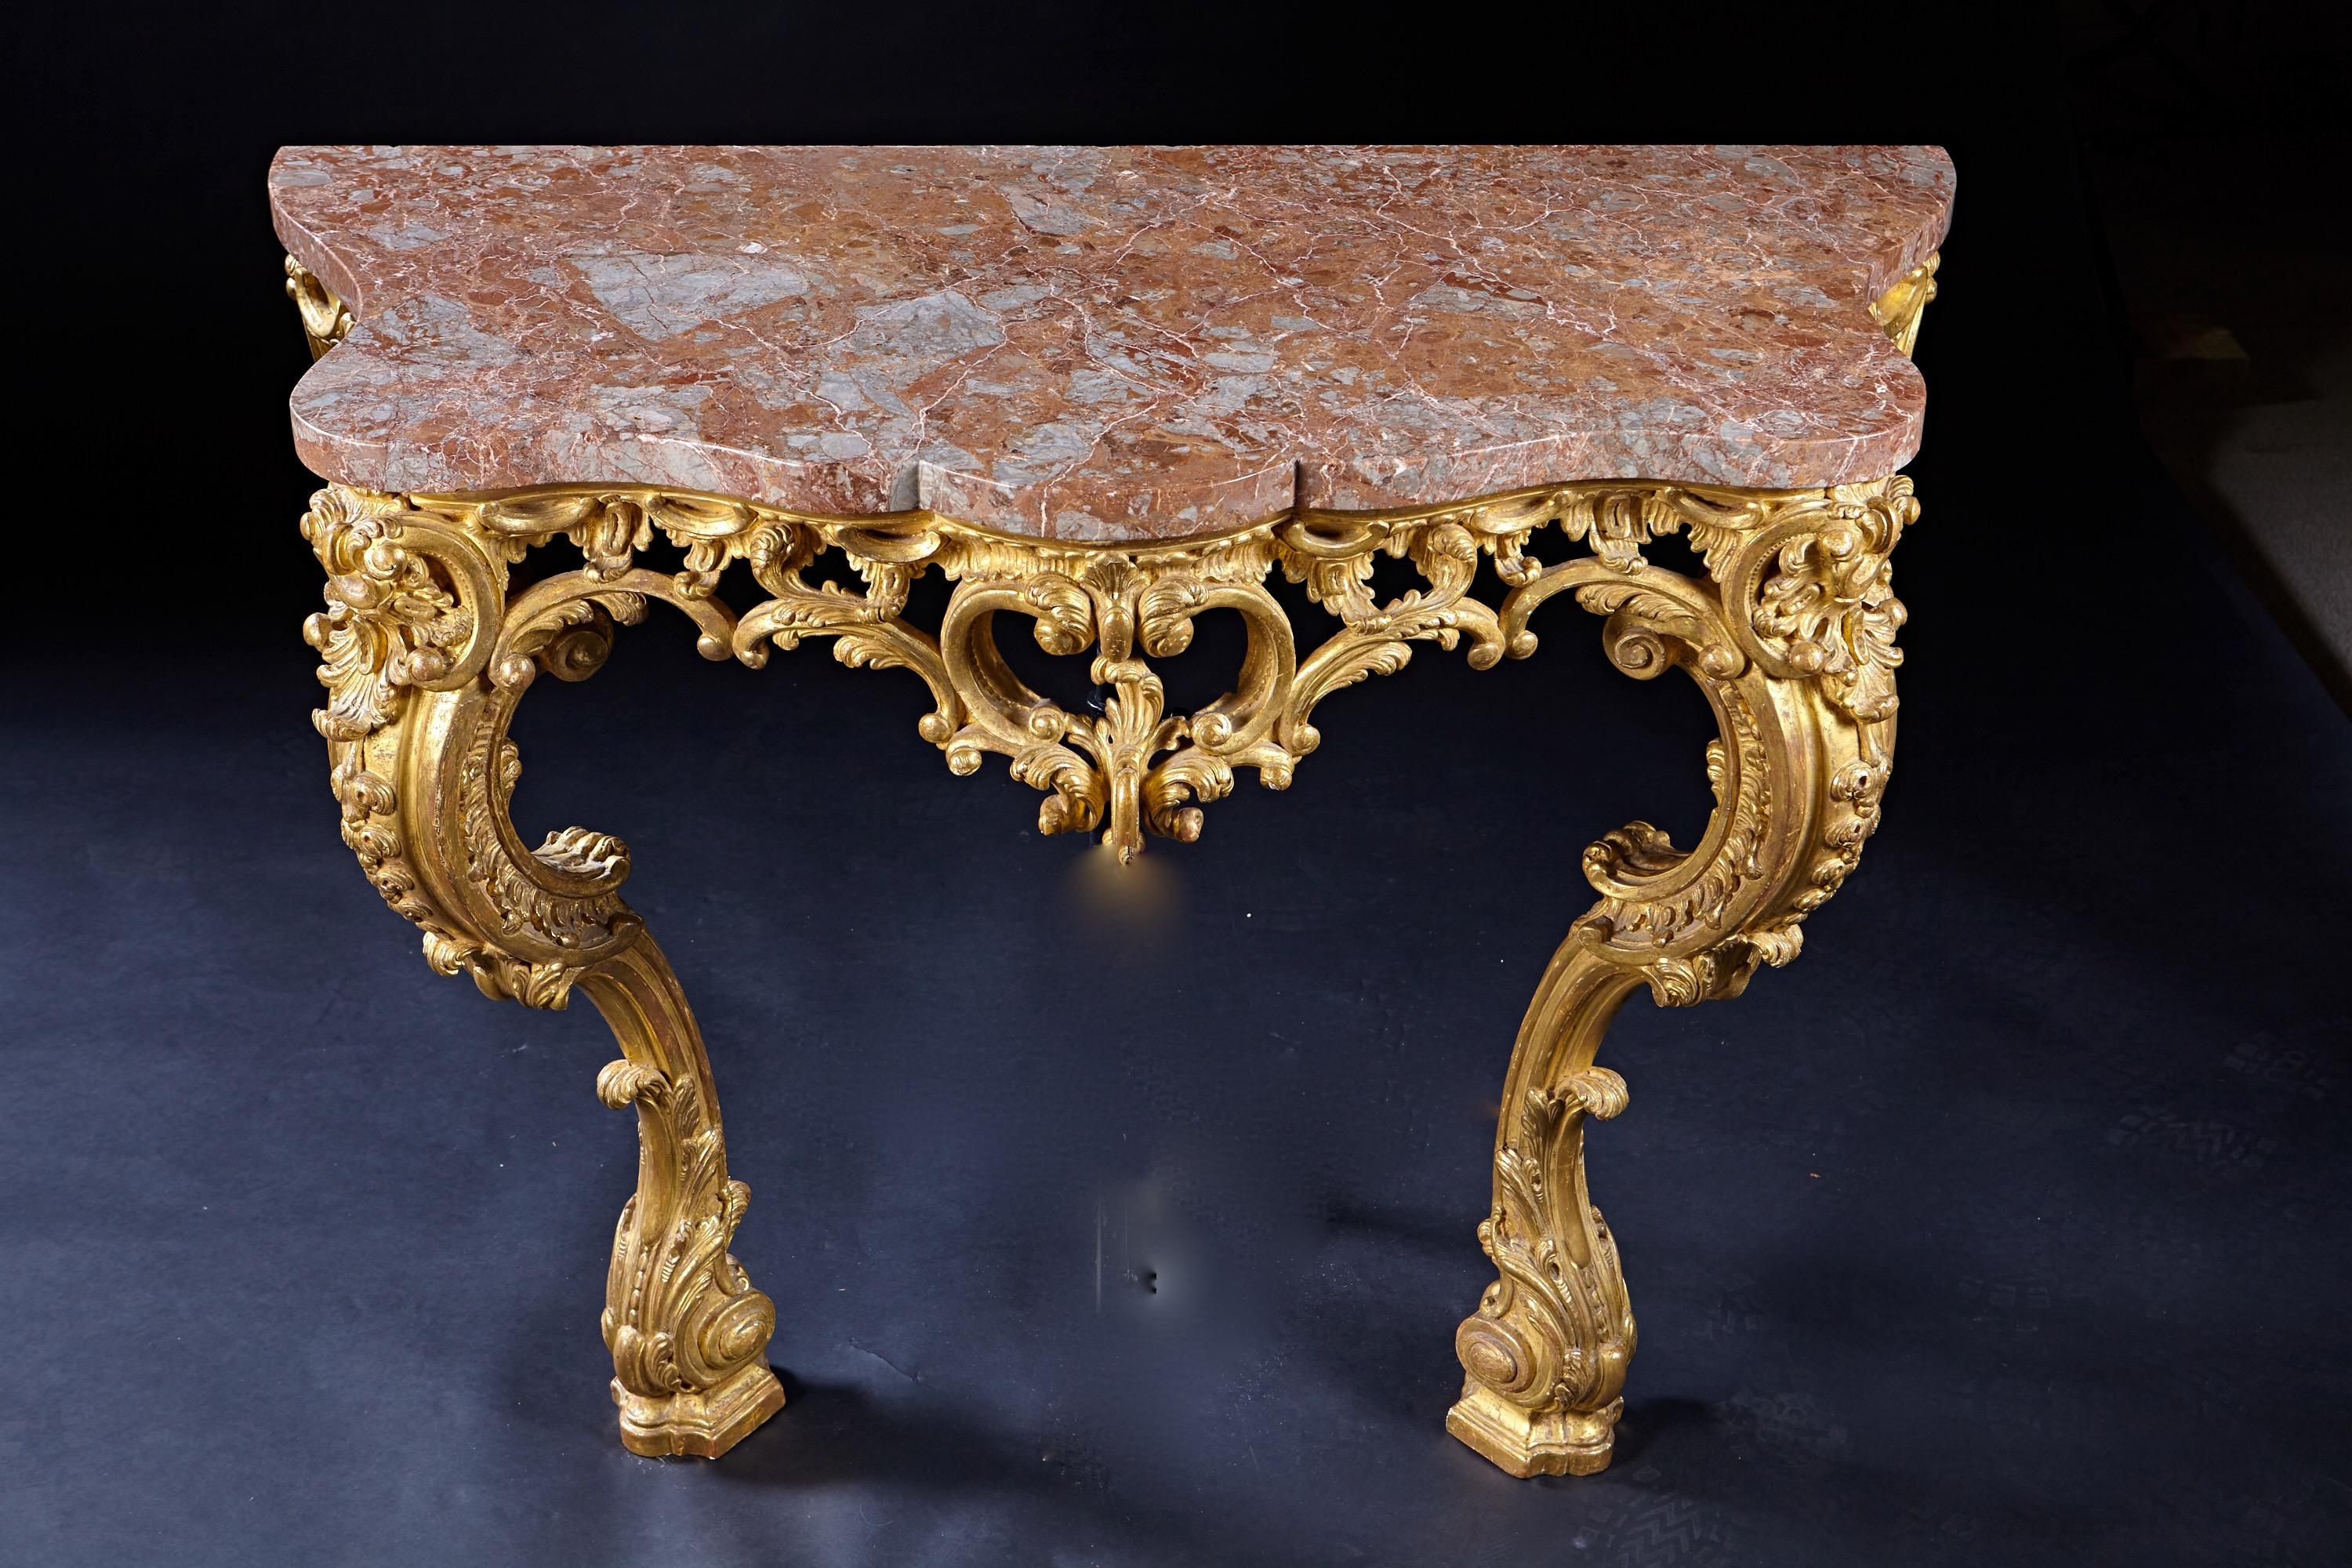 Mid-18th Century Exceptional English George III Period Carved and Gilded Rococo Console Table For Sale